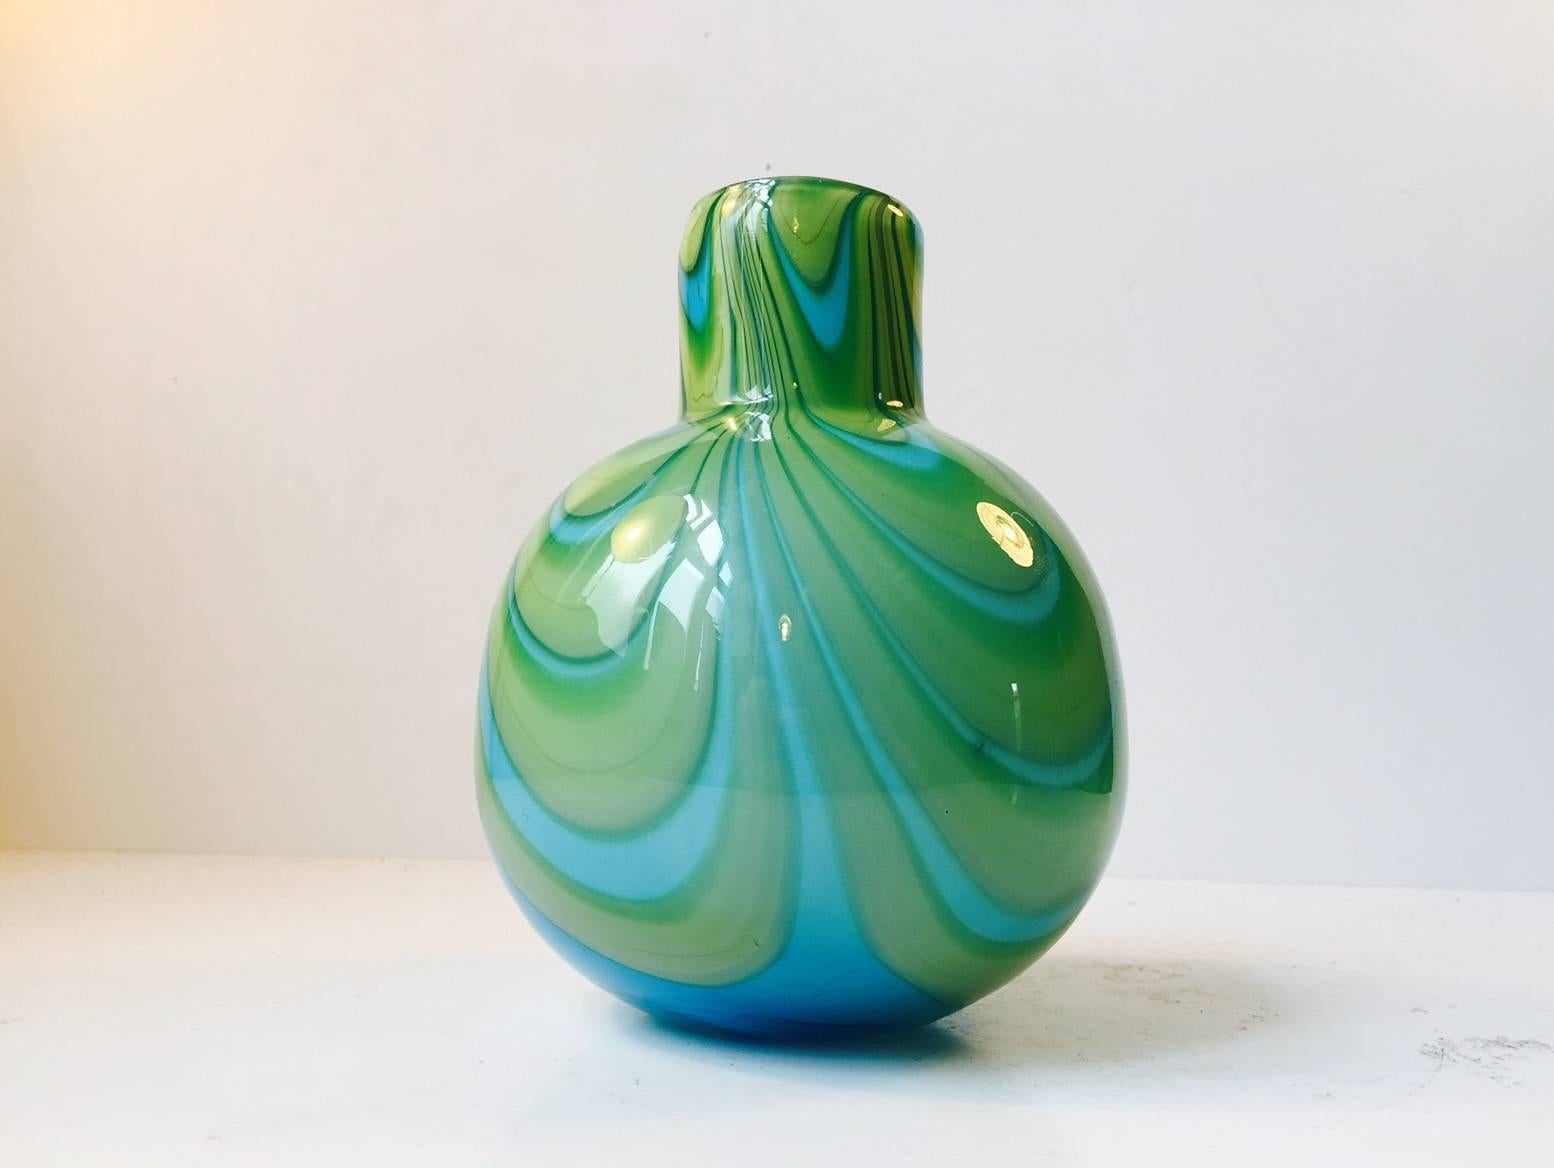 This thick and heavy vase with bon-bon stripes was designed by Carlo Moretti and manufactured in Murano, Italy during the 1970s.